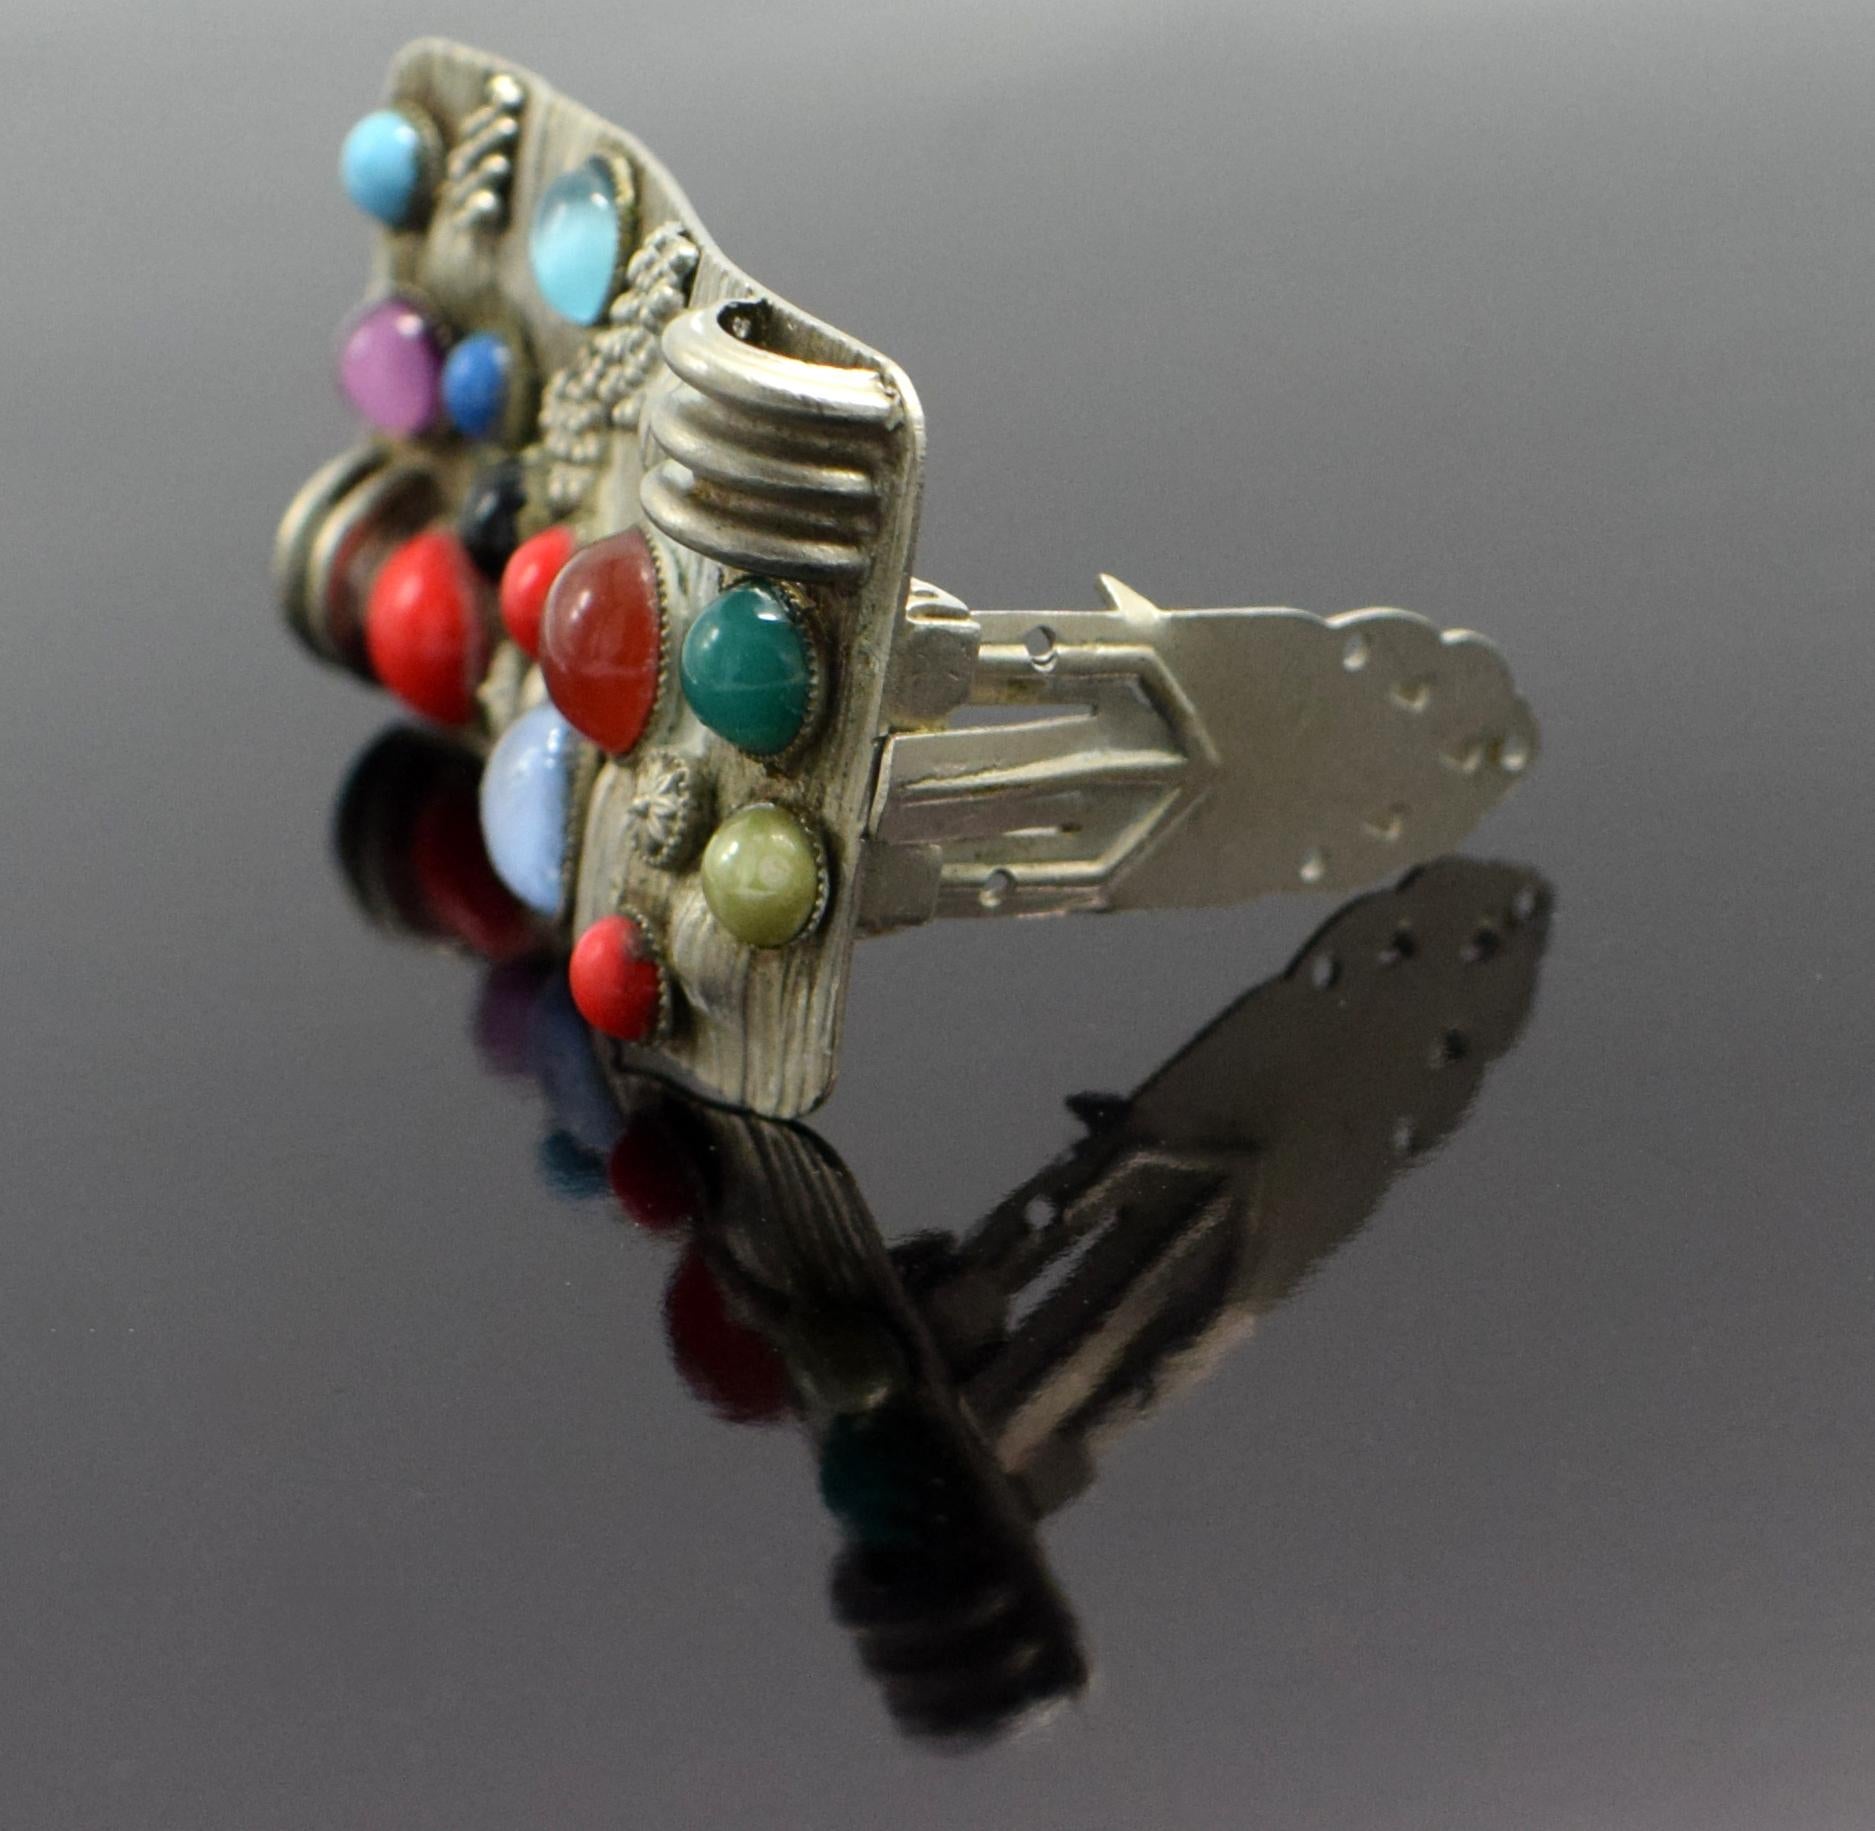 Stunning modernist dress clip with multi coloured and varying in size glass stones. I could wax lyrical all day about this dress clip but I think the images will be more eloquent in describing this fabulous piece. The detailing and intricacy in the